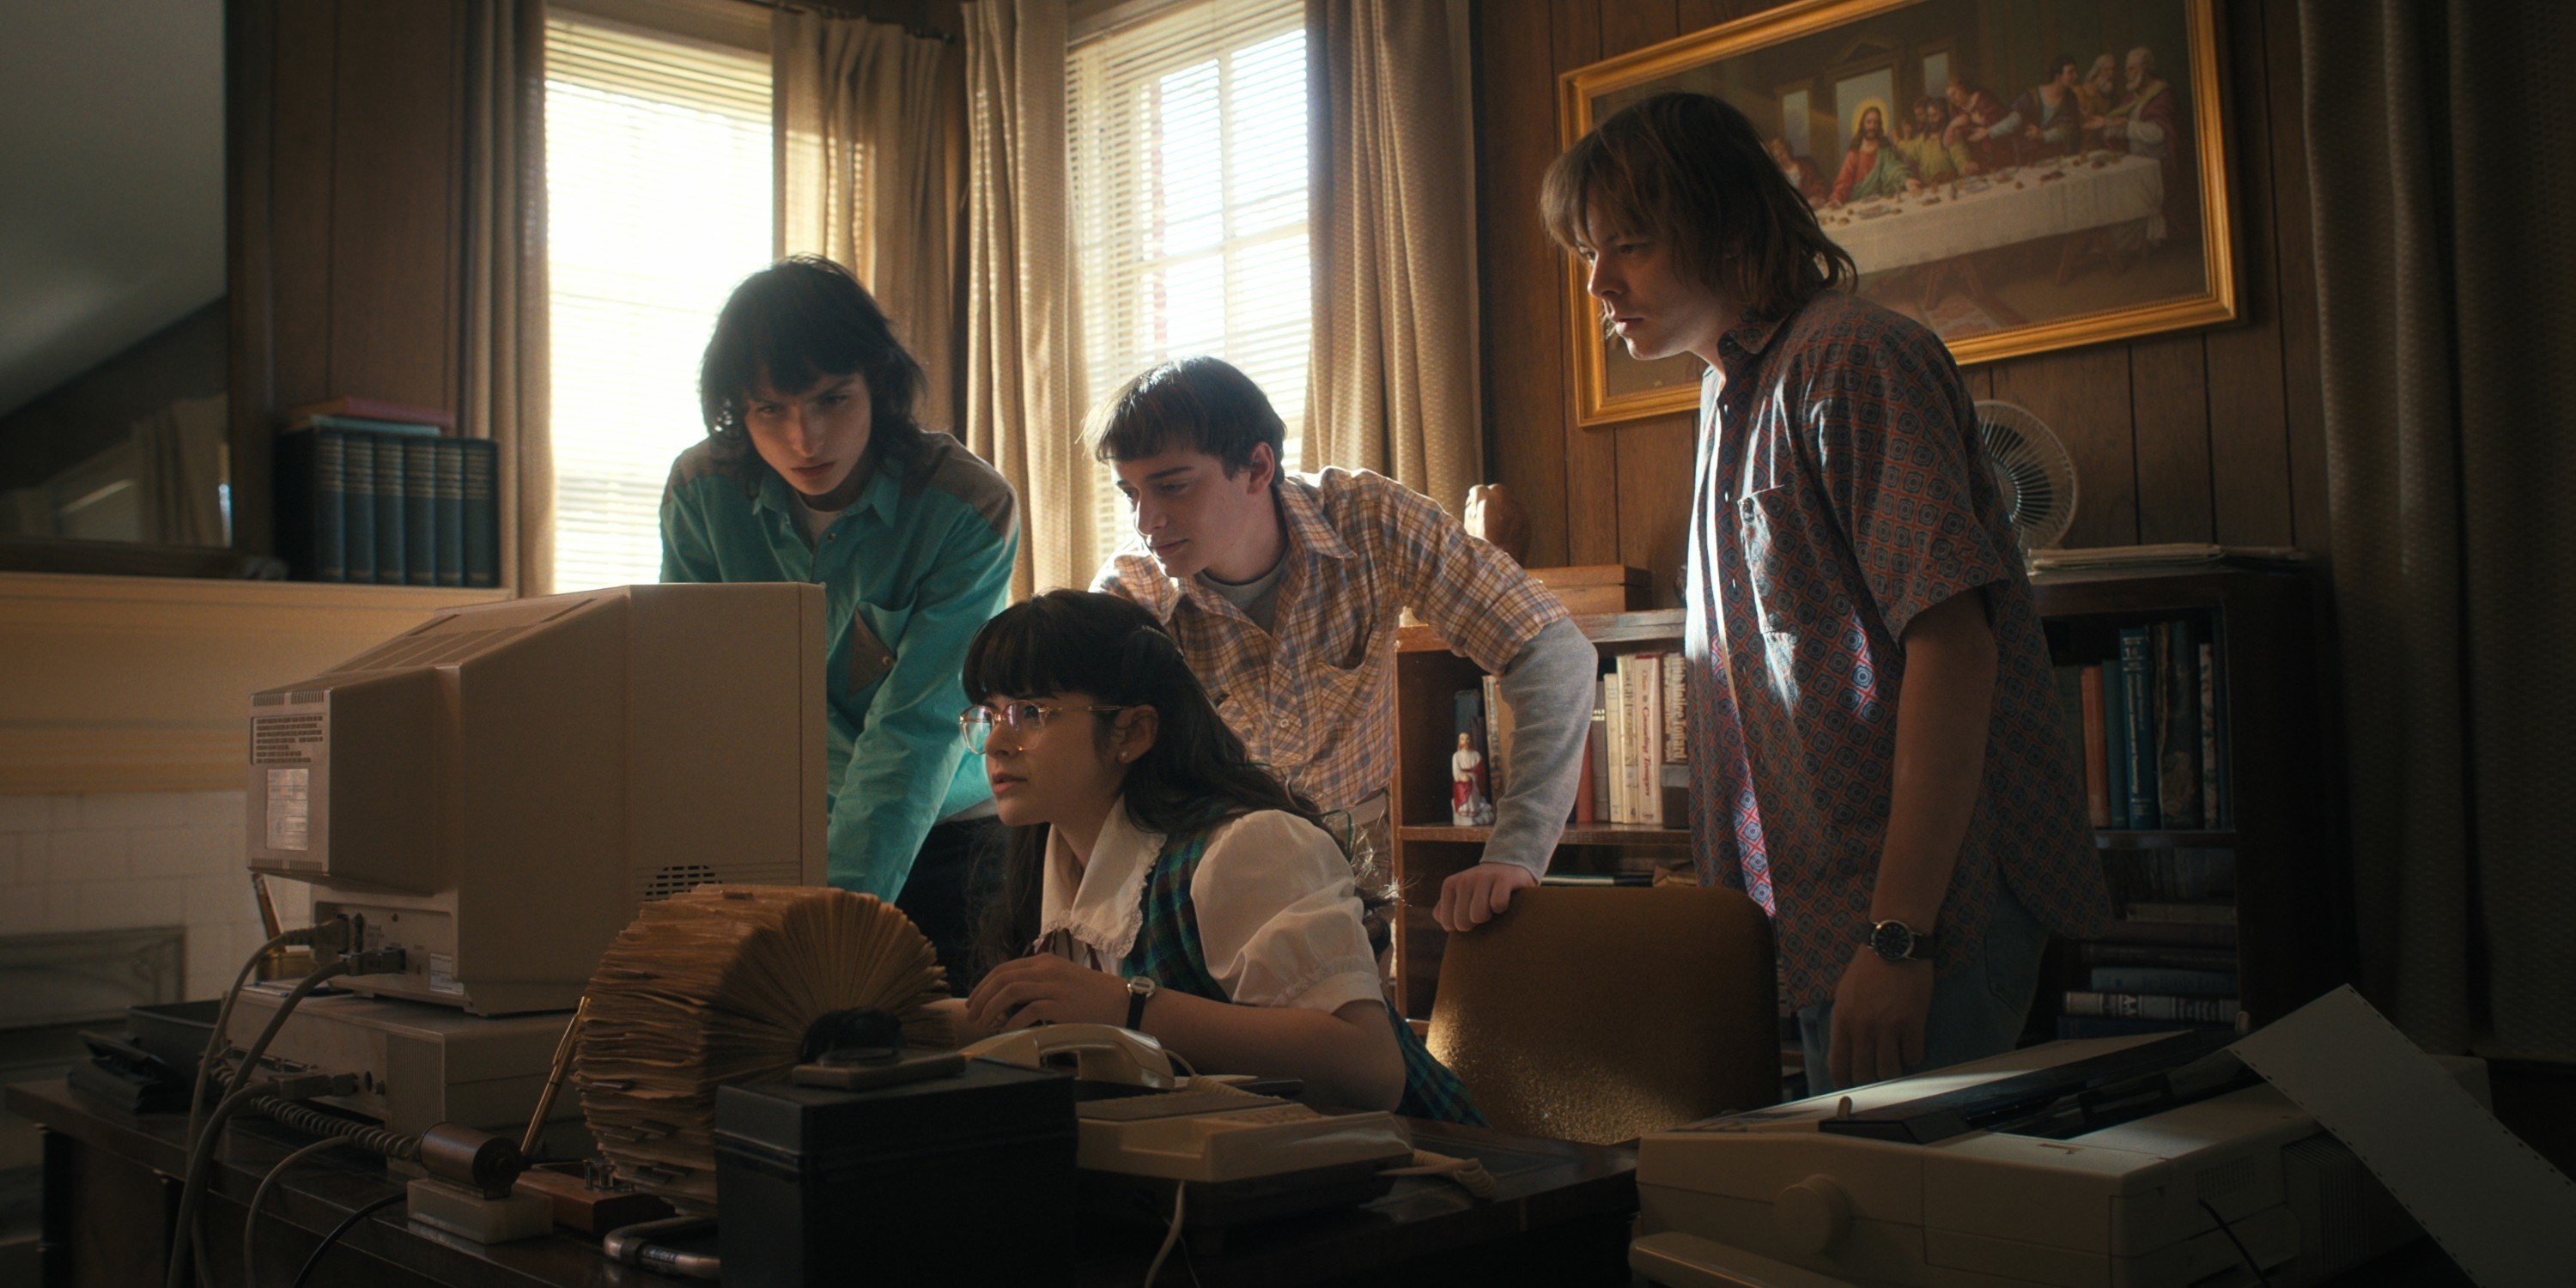 four of the characters huddled around a computer